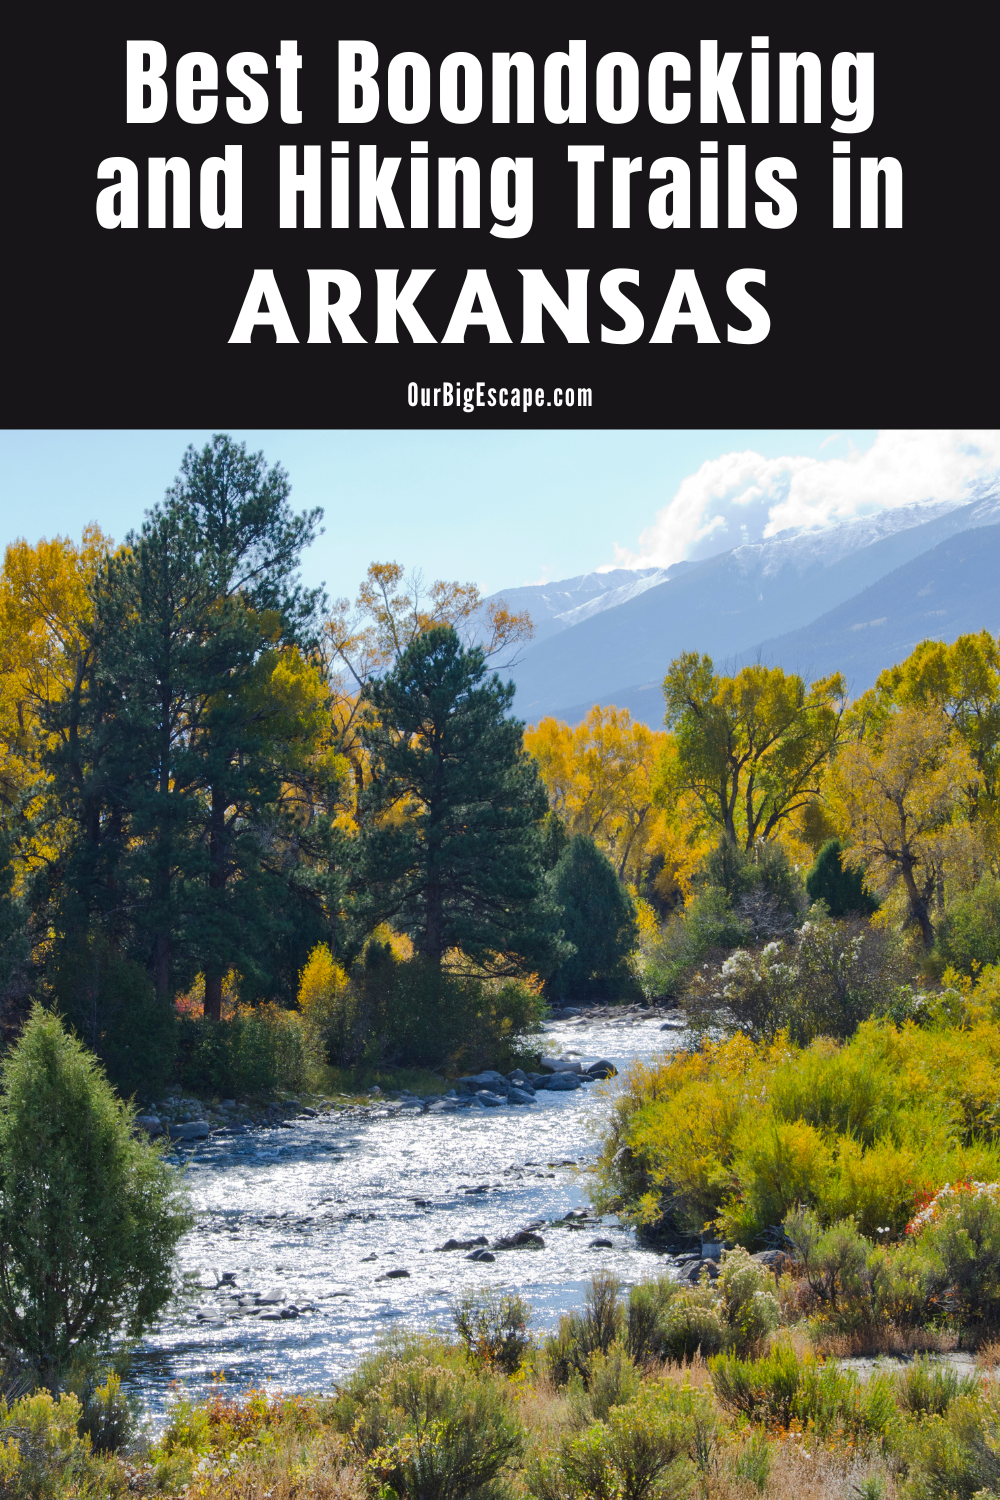 Best Boondocking and Hiking Trails in Arkansas